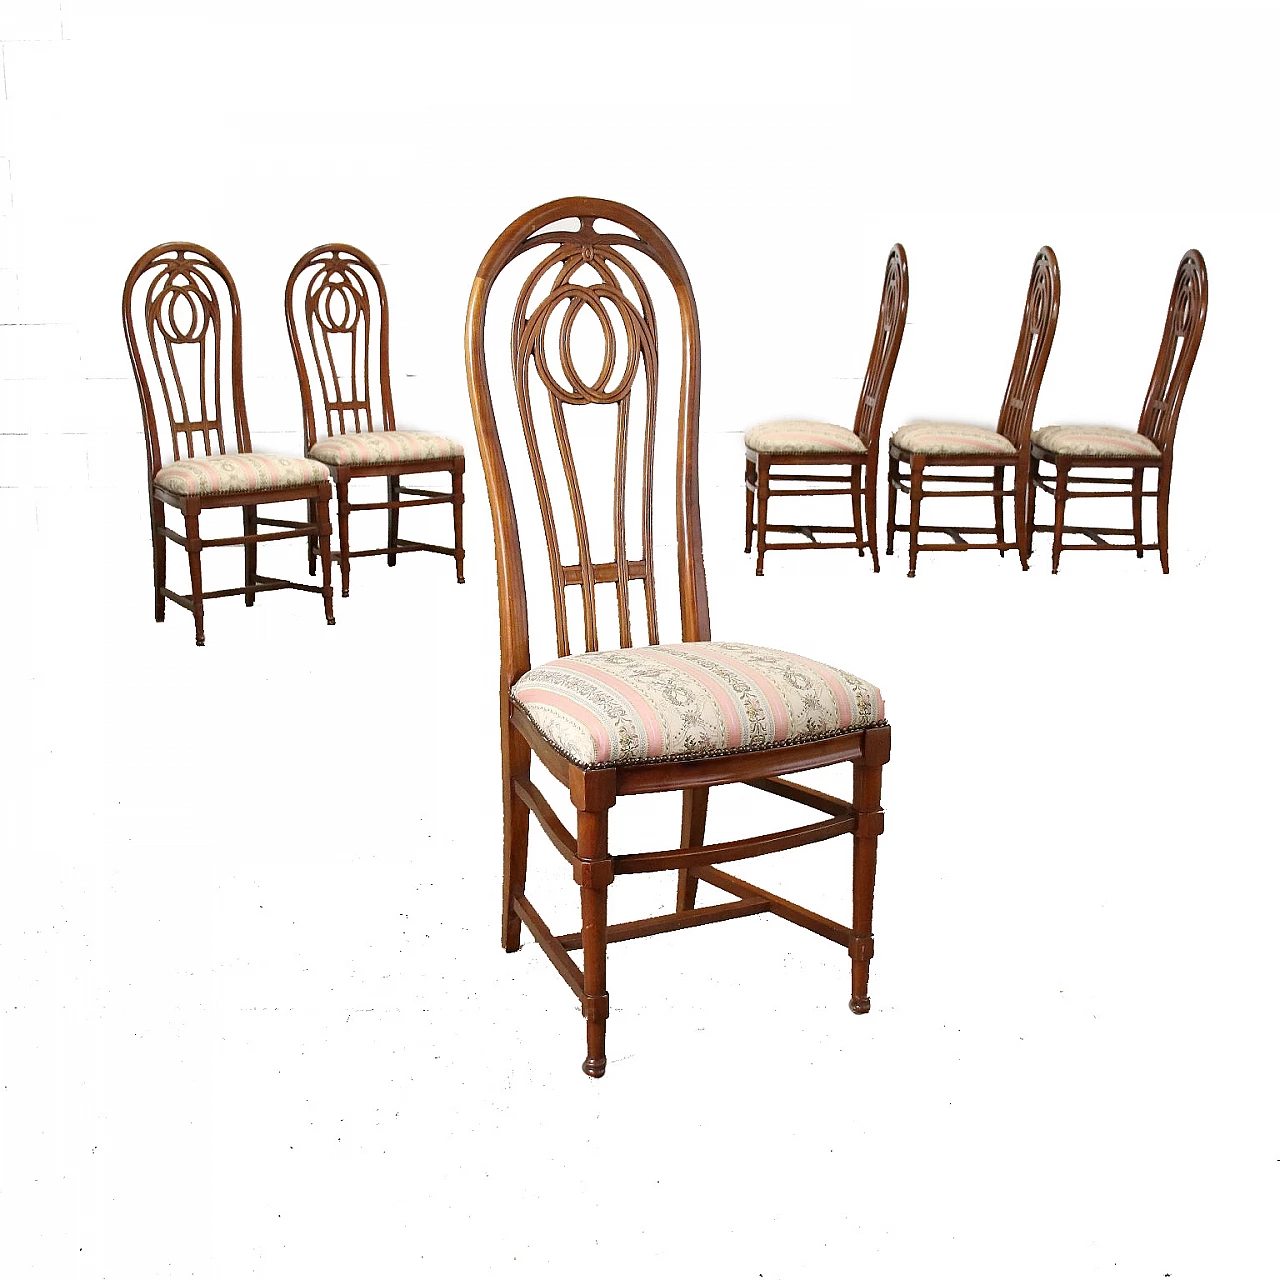 6 Art Nouveau style high-backed chairs, 1960s 1